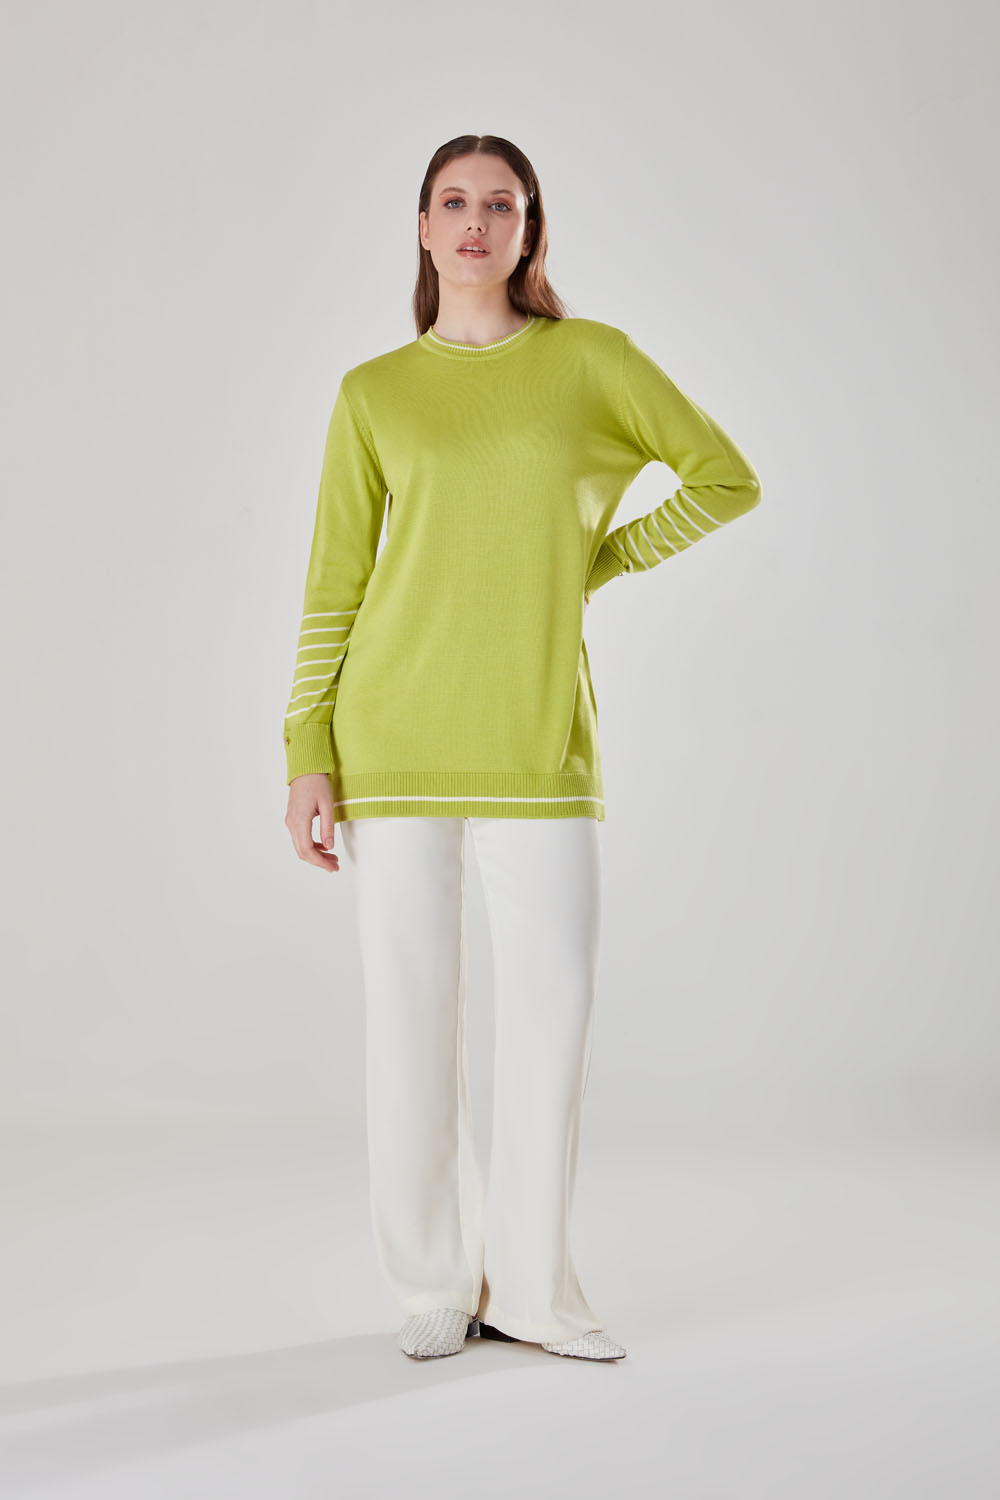 Pistachio Knitwear Tunic with Stripe Sleeves Patterned